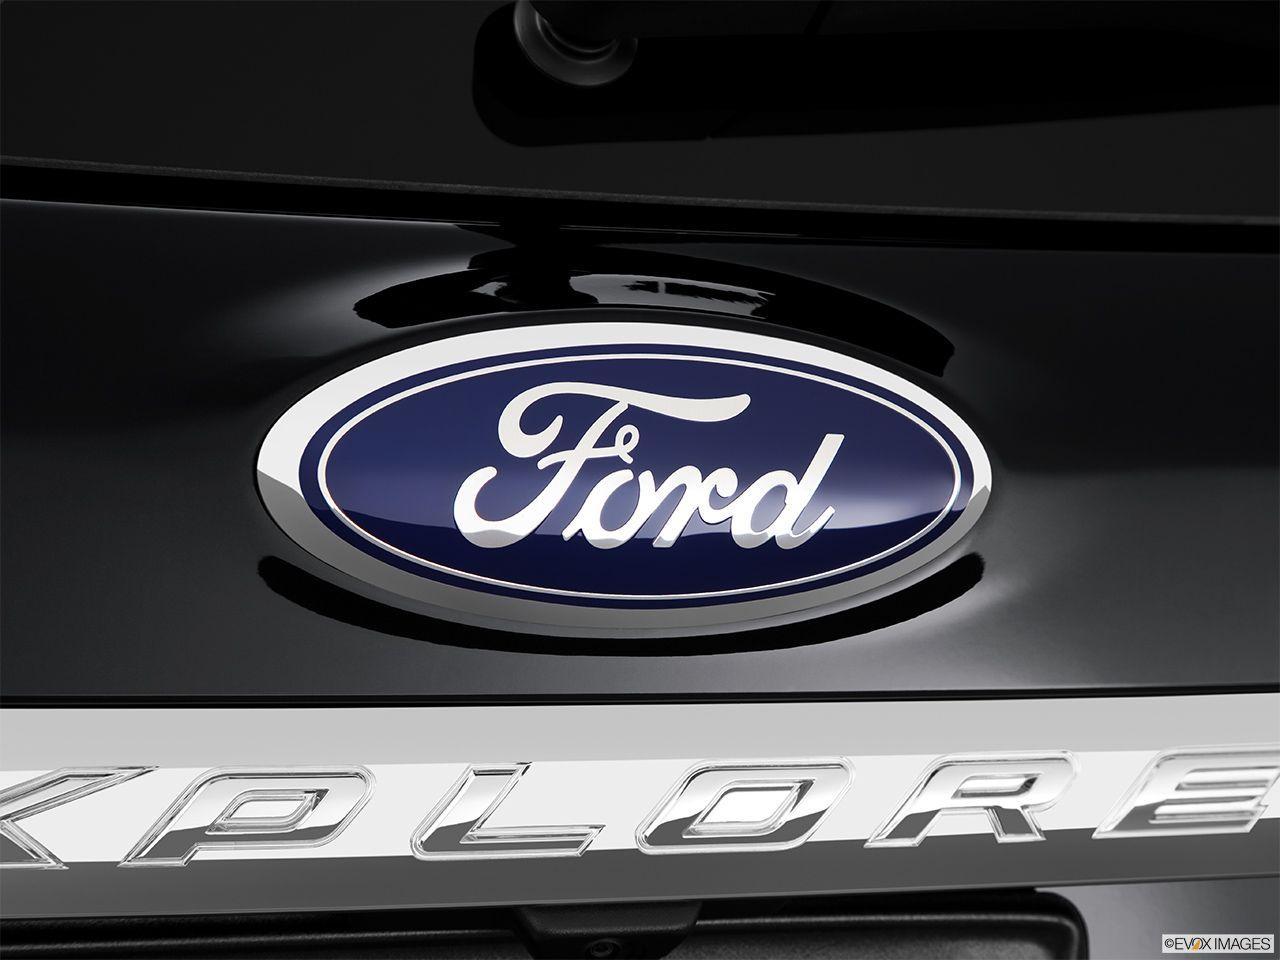 2015 Ford Logo - Ford Explorer FWD 4 Door XLT angle view 2015 Ford